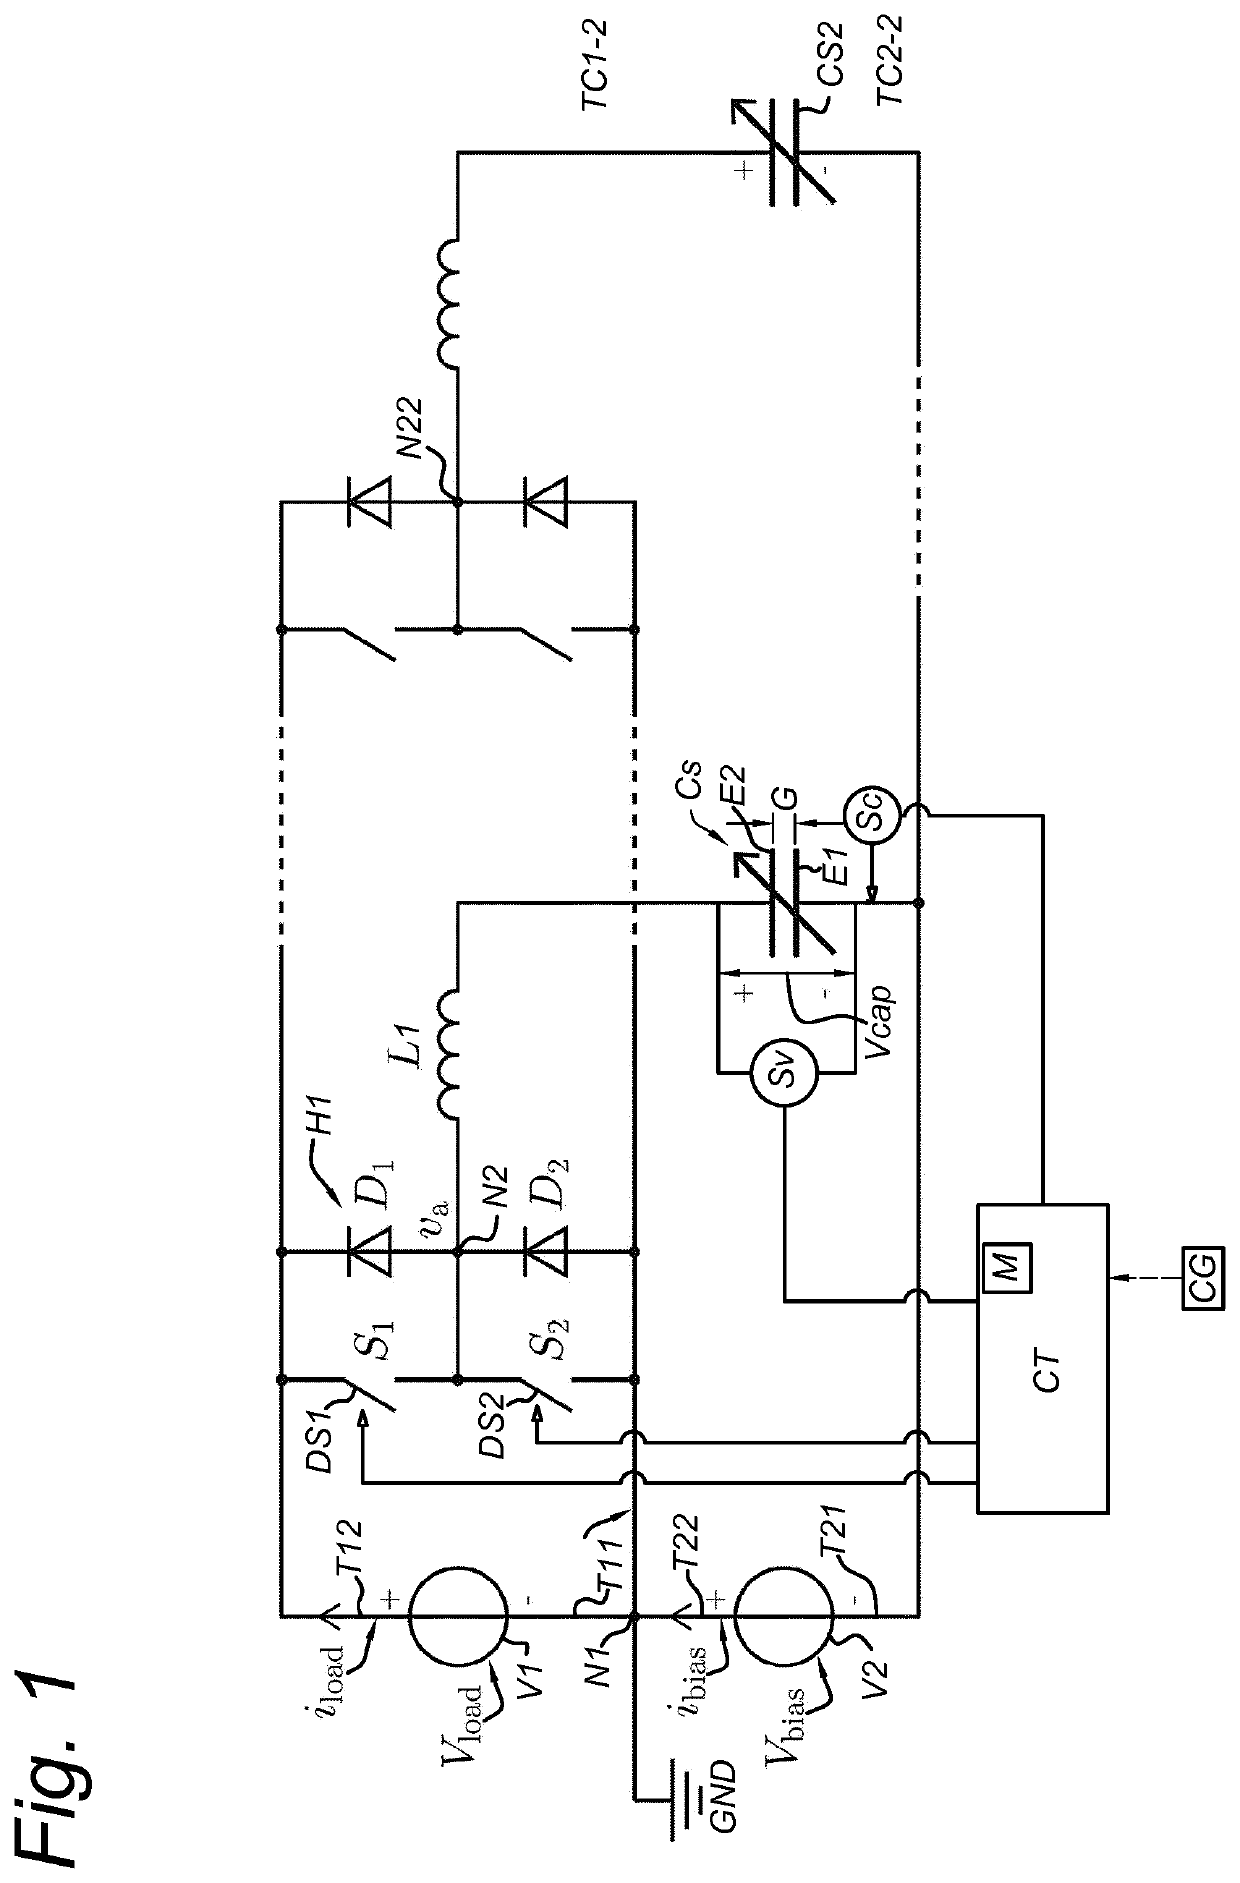 Switch assisted diode-clamped energy harvesting system for variable capacitance transducers